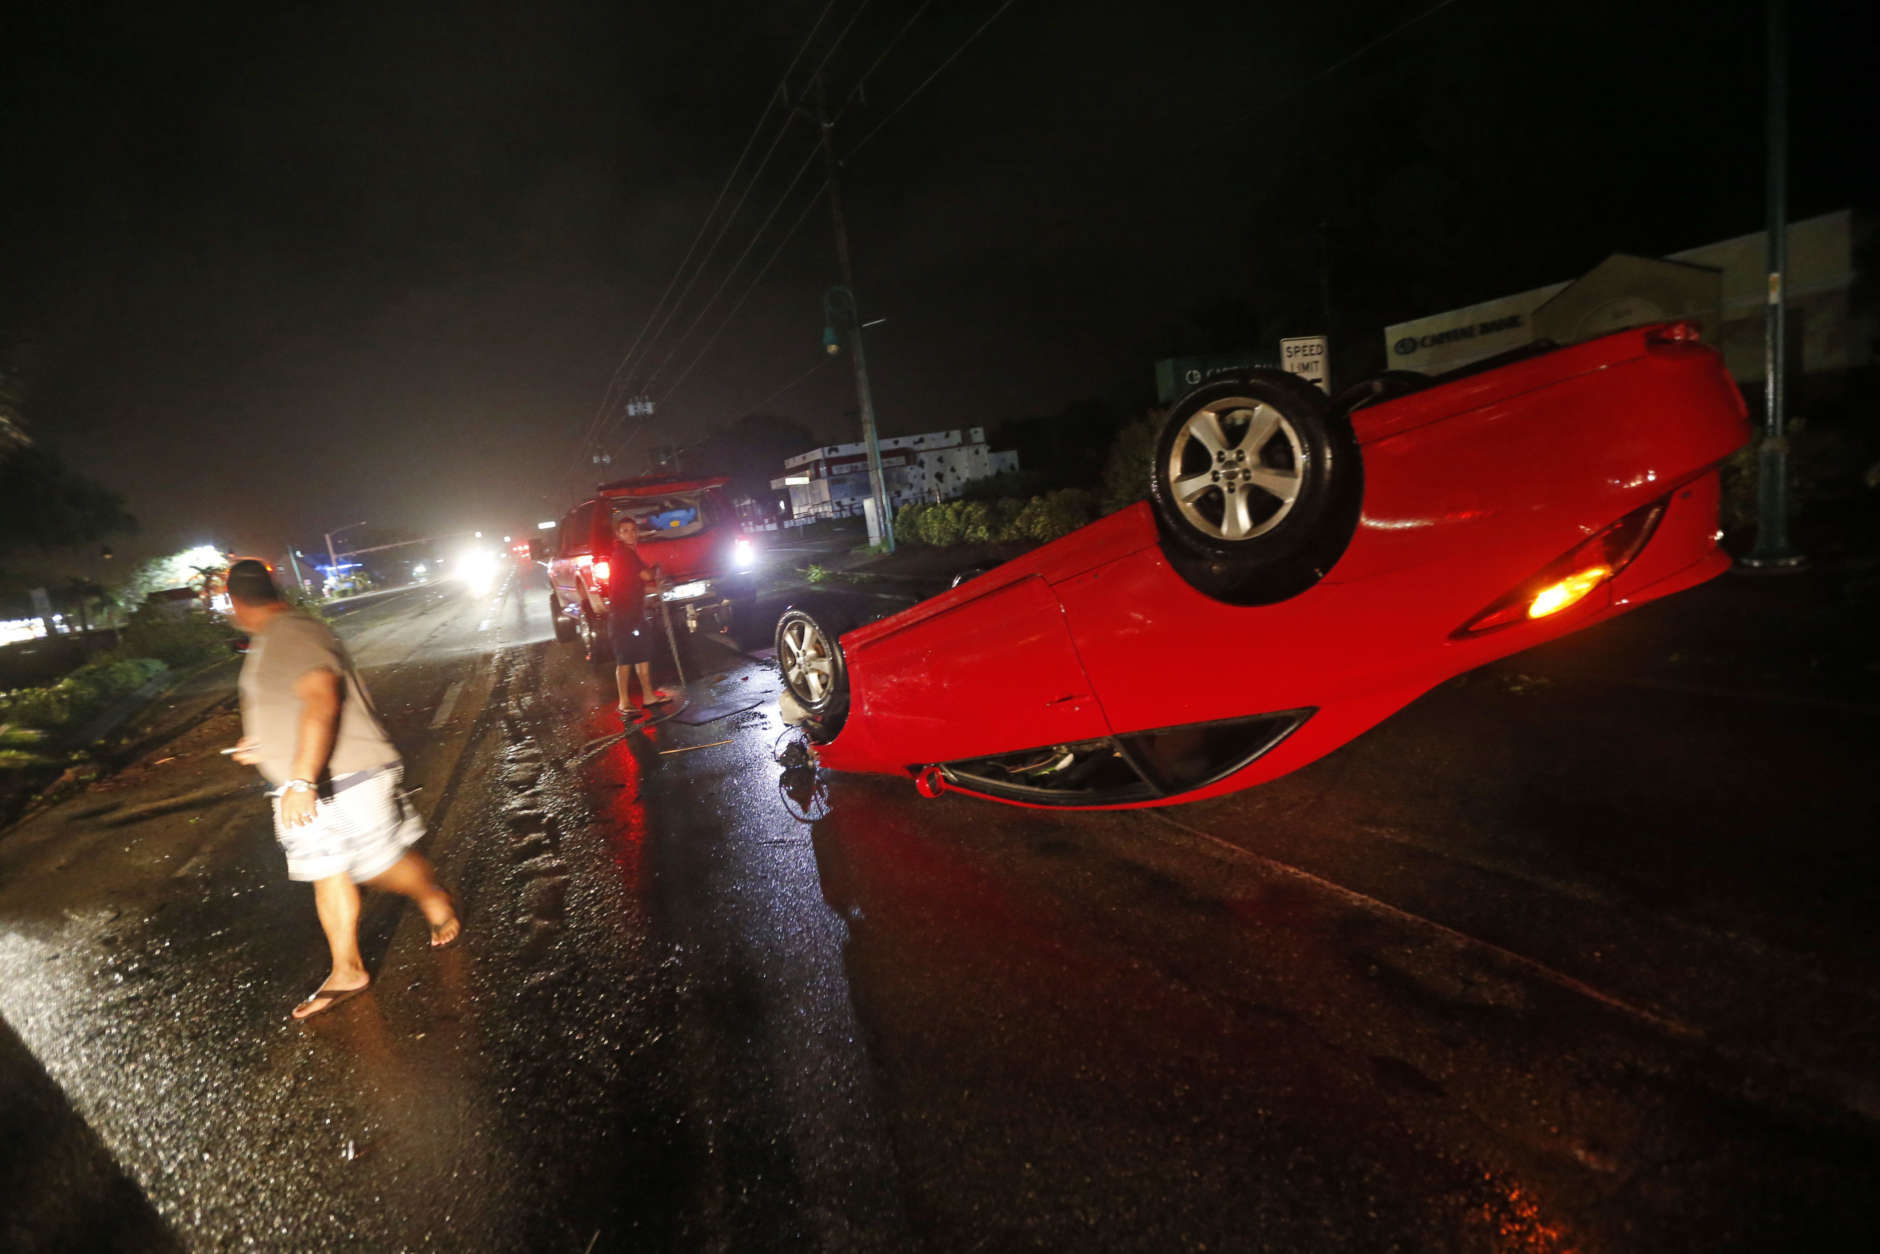 People tend to a car that flipped over on Cape Coral Parkway during Hurricane Irma, in Cape Coral, Fla., Sunday, Sept. 10, 2017. (AP Photo/Gerald Herbert)